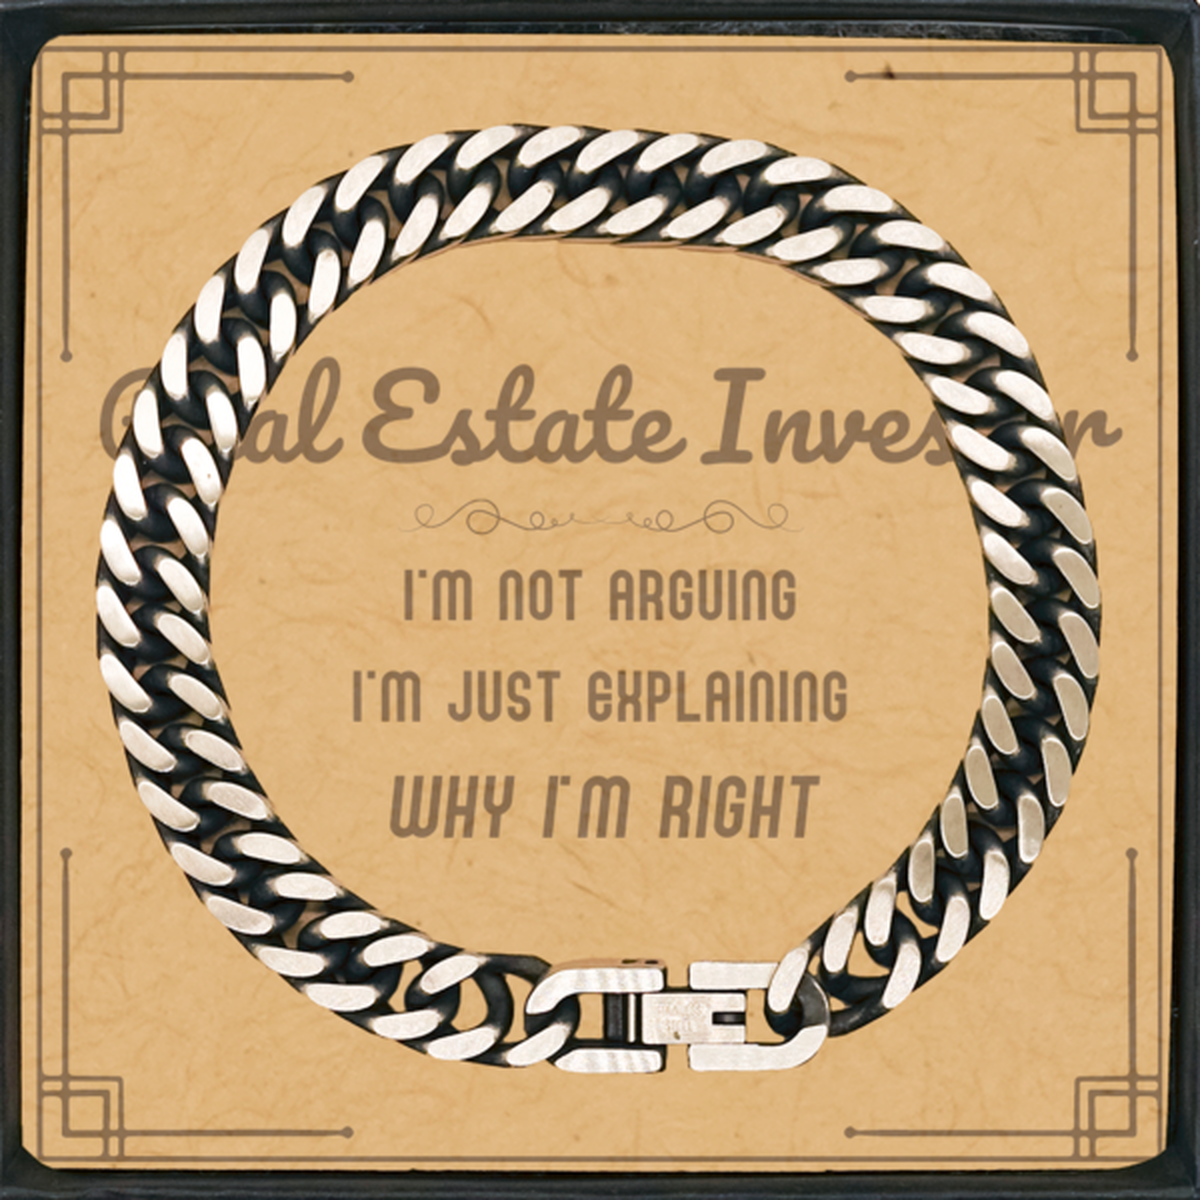 Real Estate Investor I'm not Arguing. I'm Just Explaining Why I'm RIGHT Cuban Link Chain Bracelet, Funny Saying Quote Real Estate Investor Gifts For Real Estate Investor Message Card Graduation Birthday Christmas Gifts for Men Women Coworker